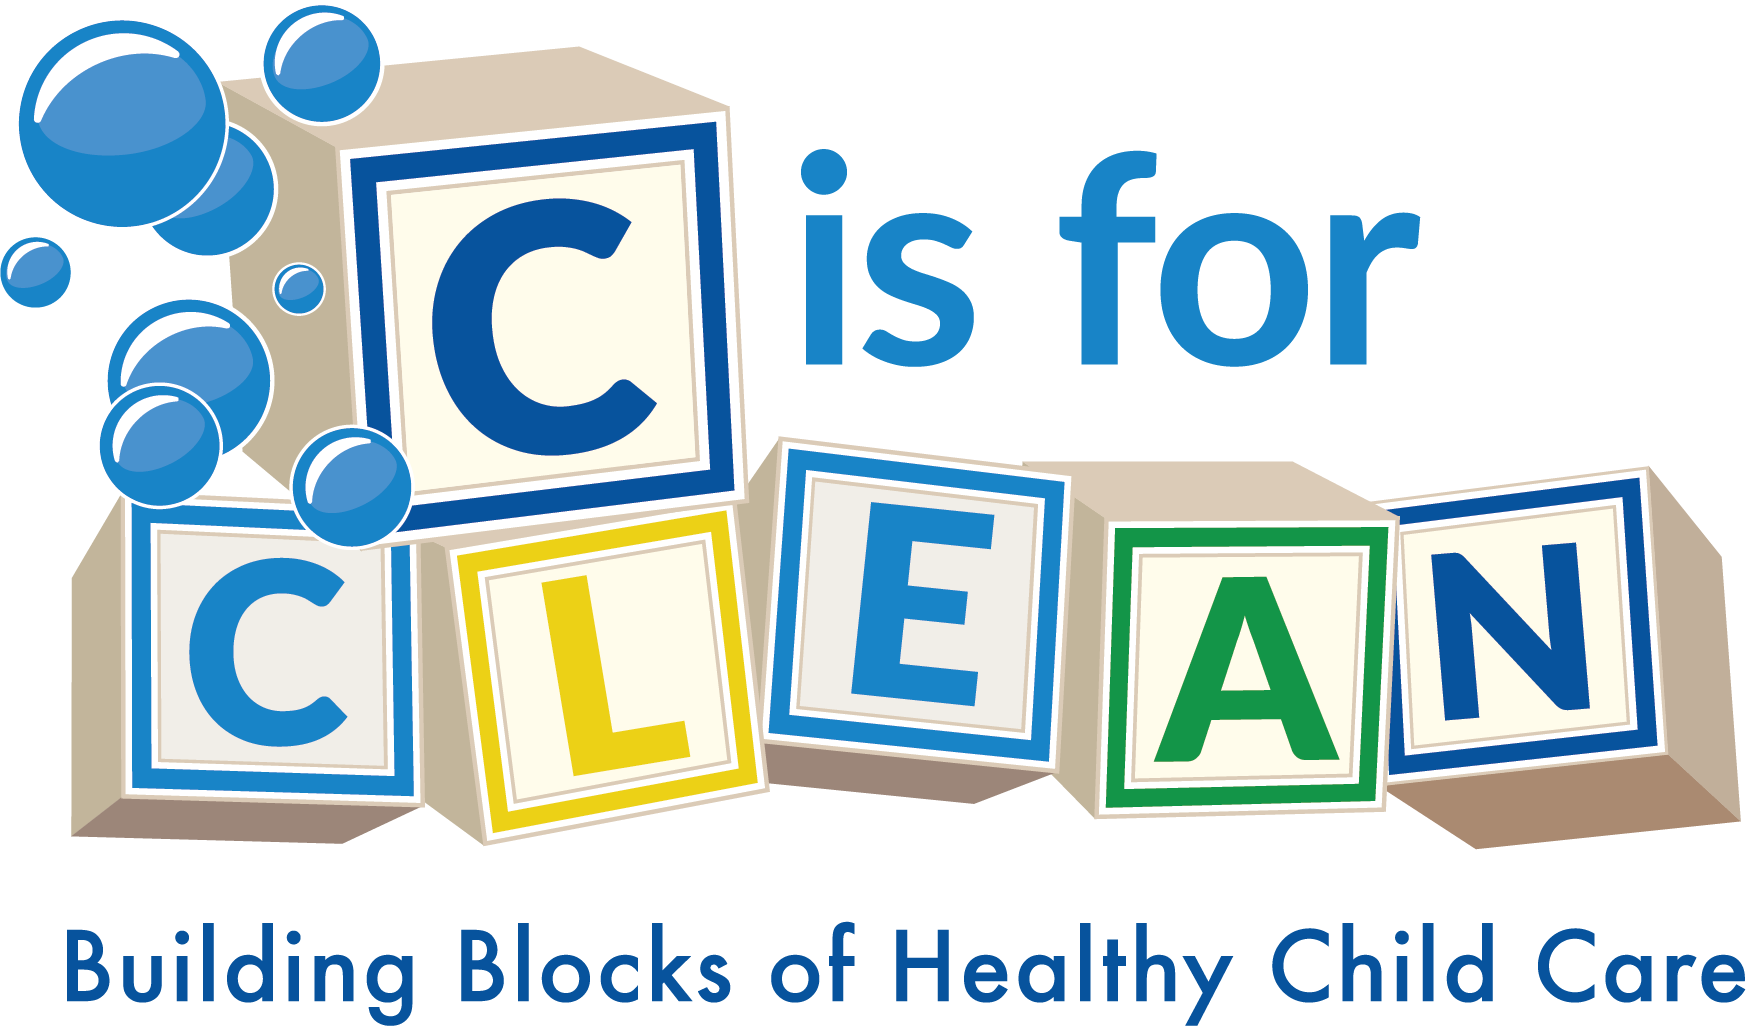 https://www.cleaninginstitute.org/sites/default/files/pictures/cleaning-tips/childcare/BRG-1253-ACI-C-Clean-logo-Final.png